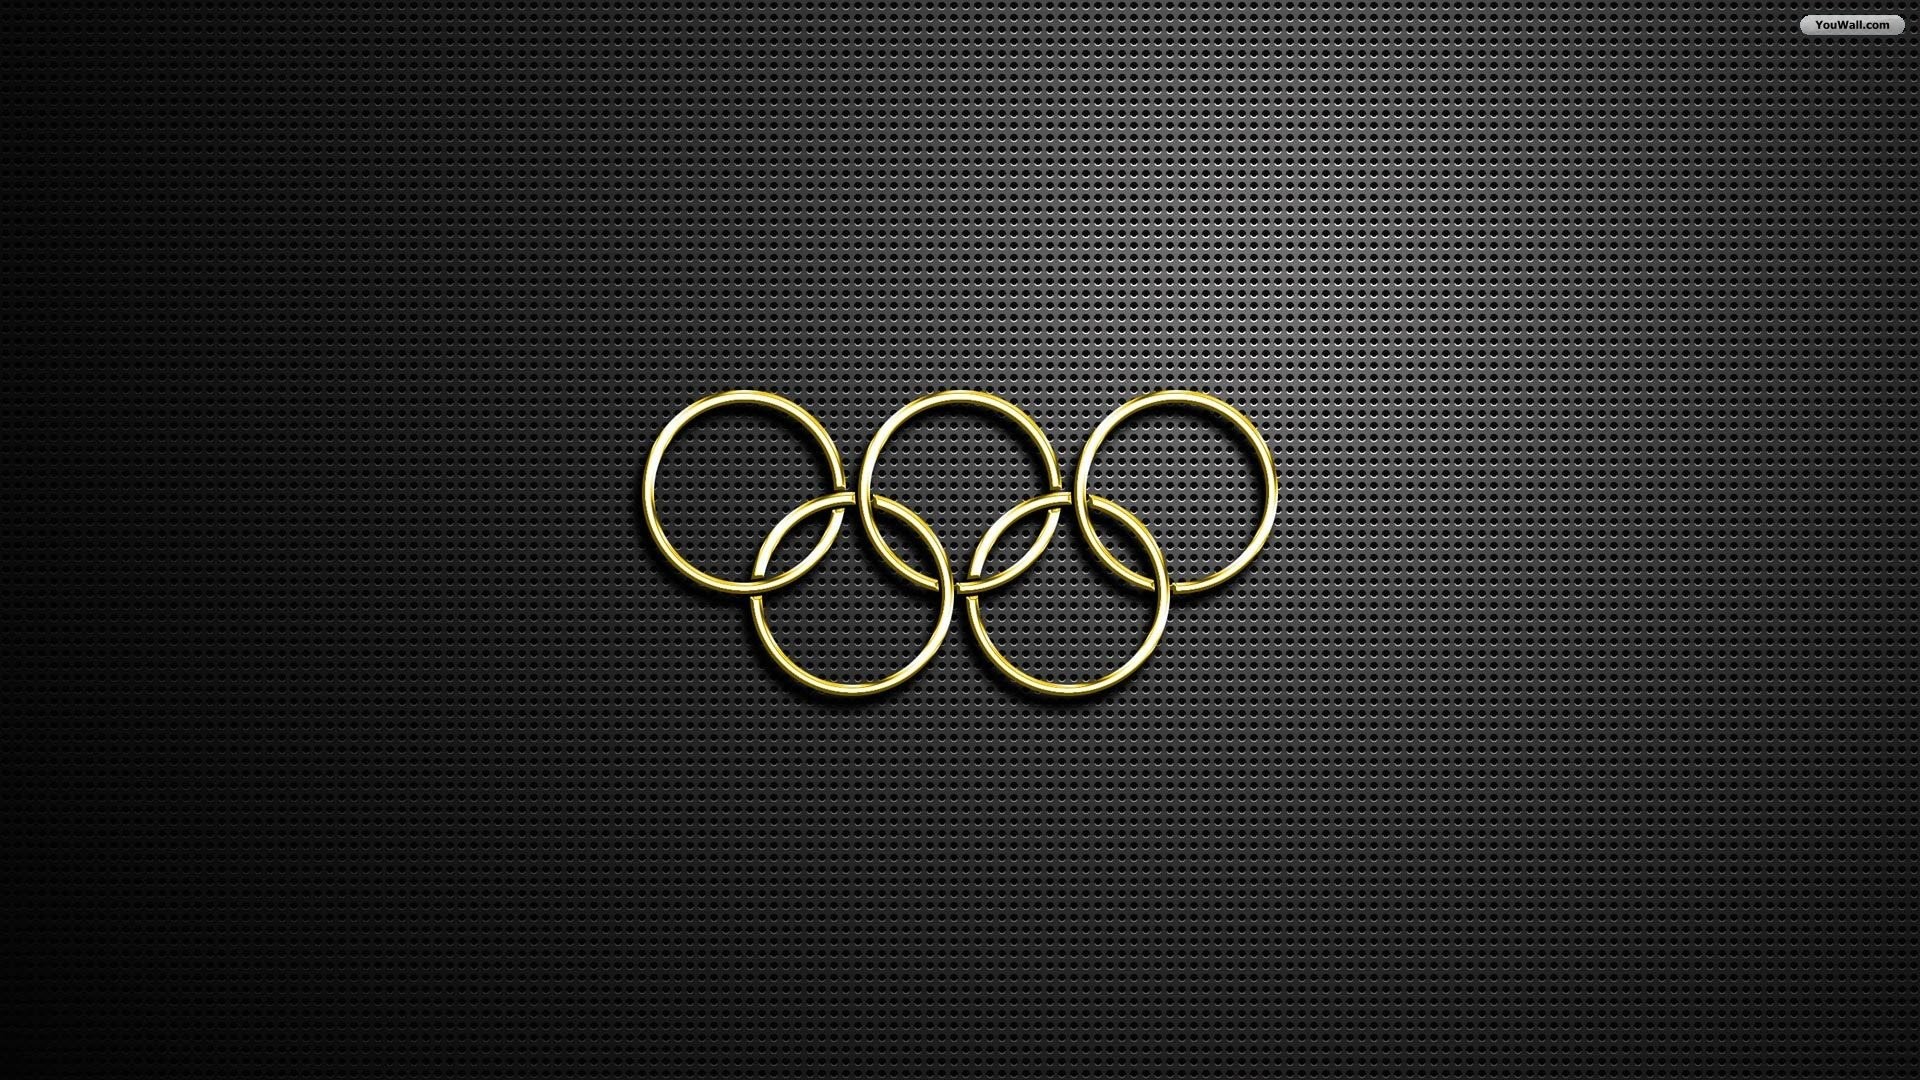 1920x1080 wallpaper game games olympic wallpapers 